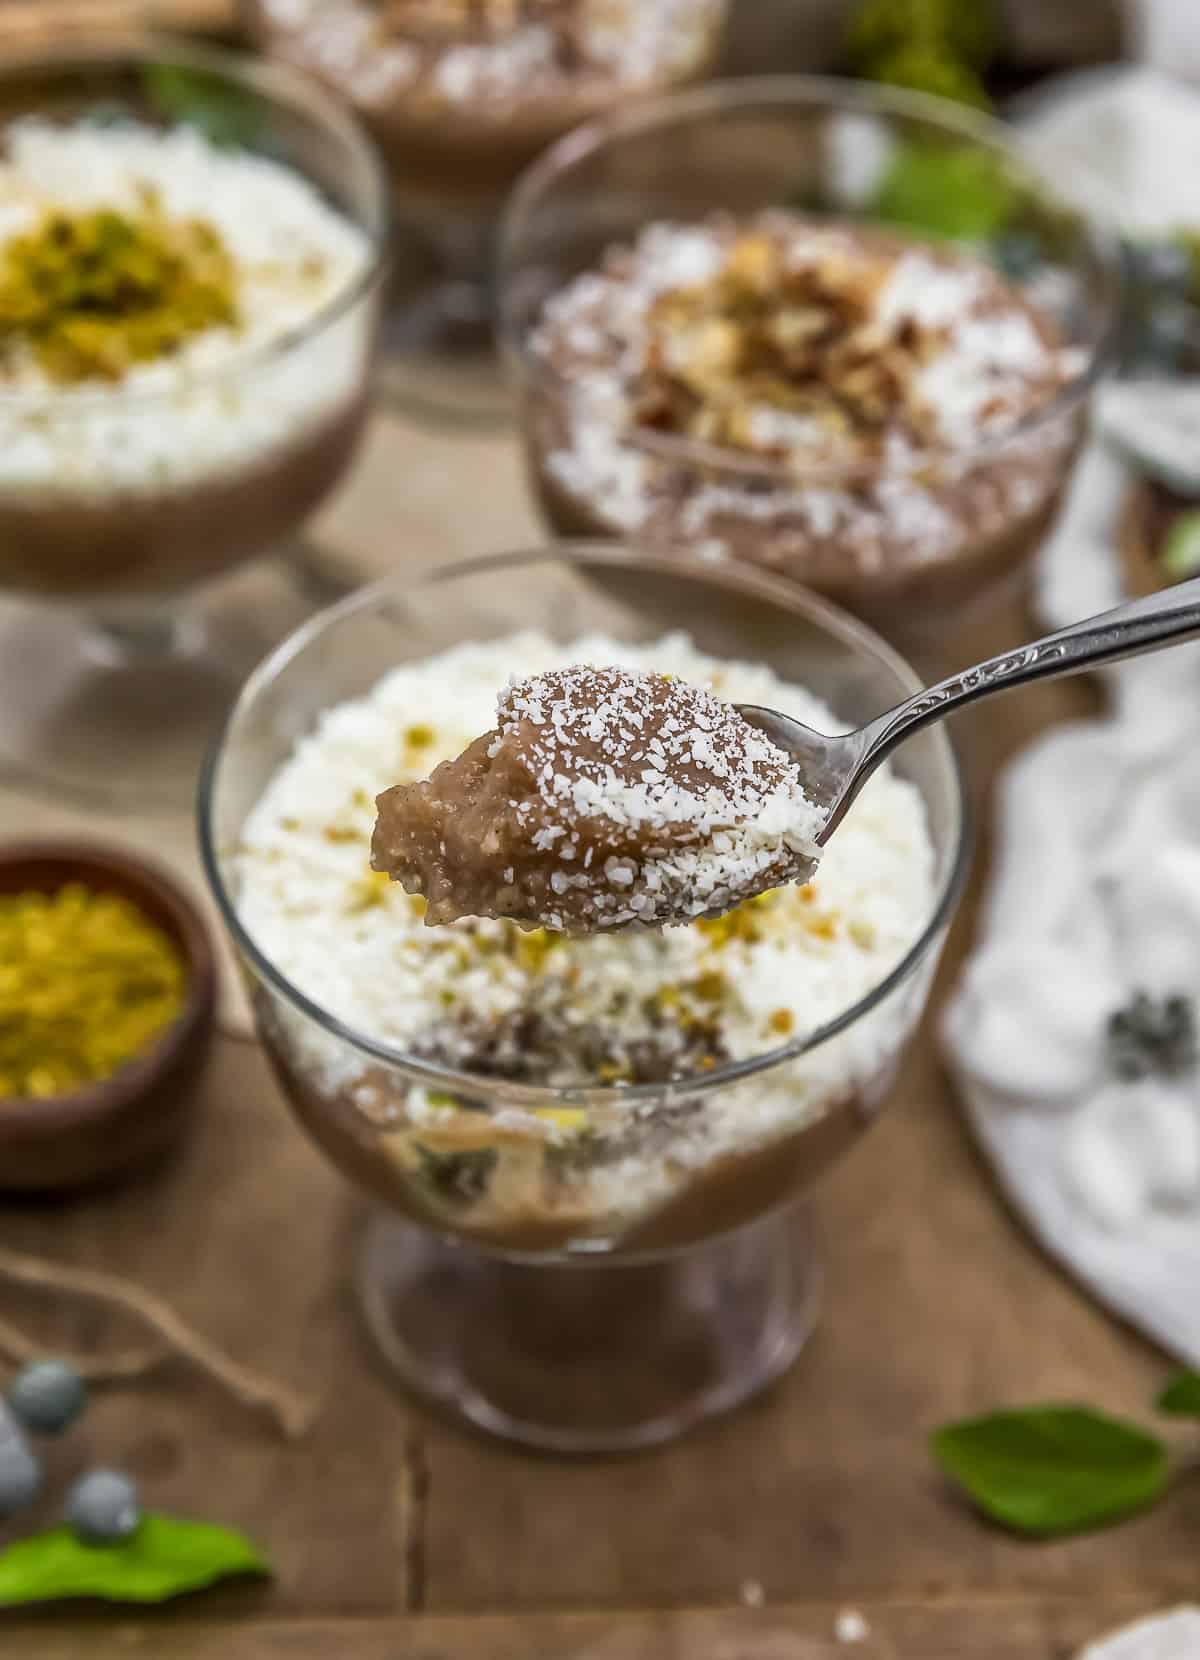 Spoonful of Spiced Rice Pudding (Lebanese Meghli)